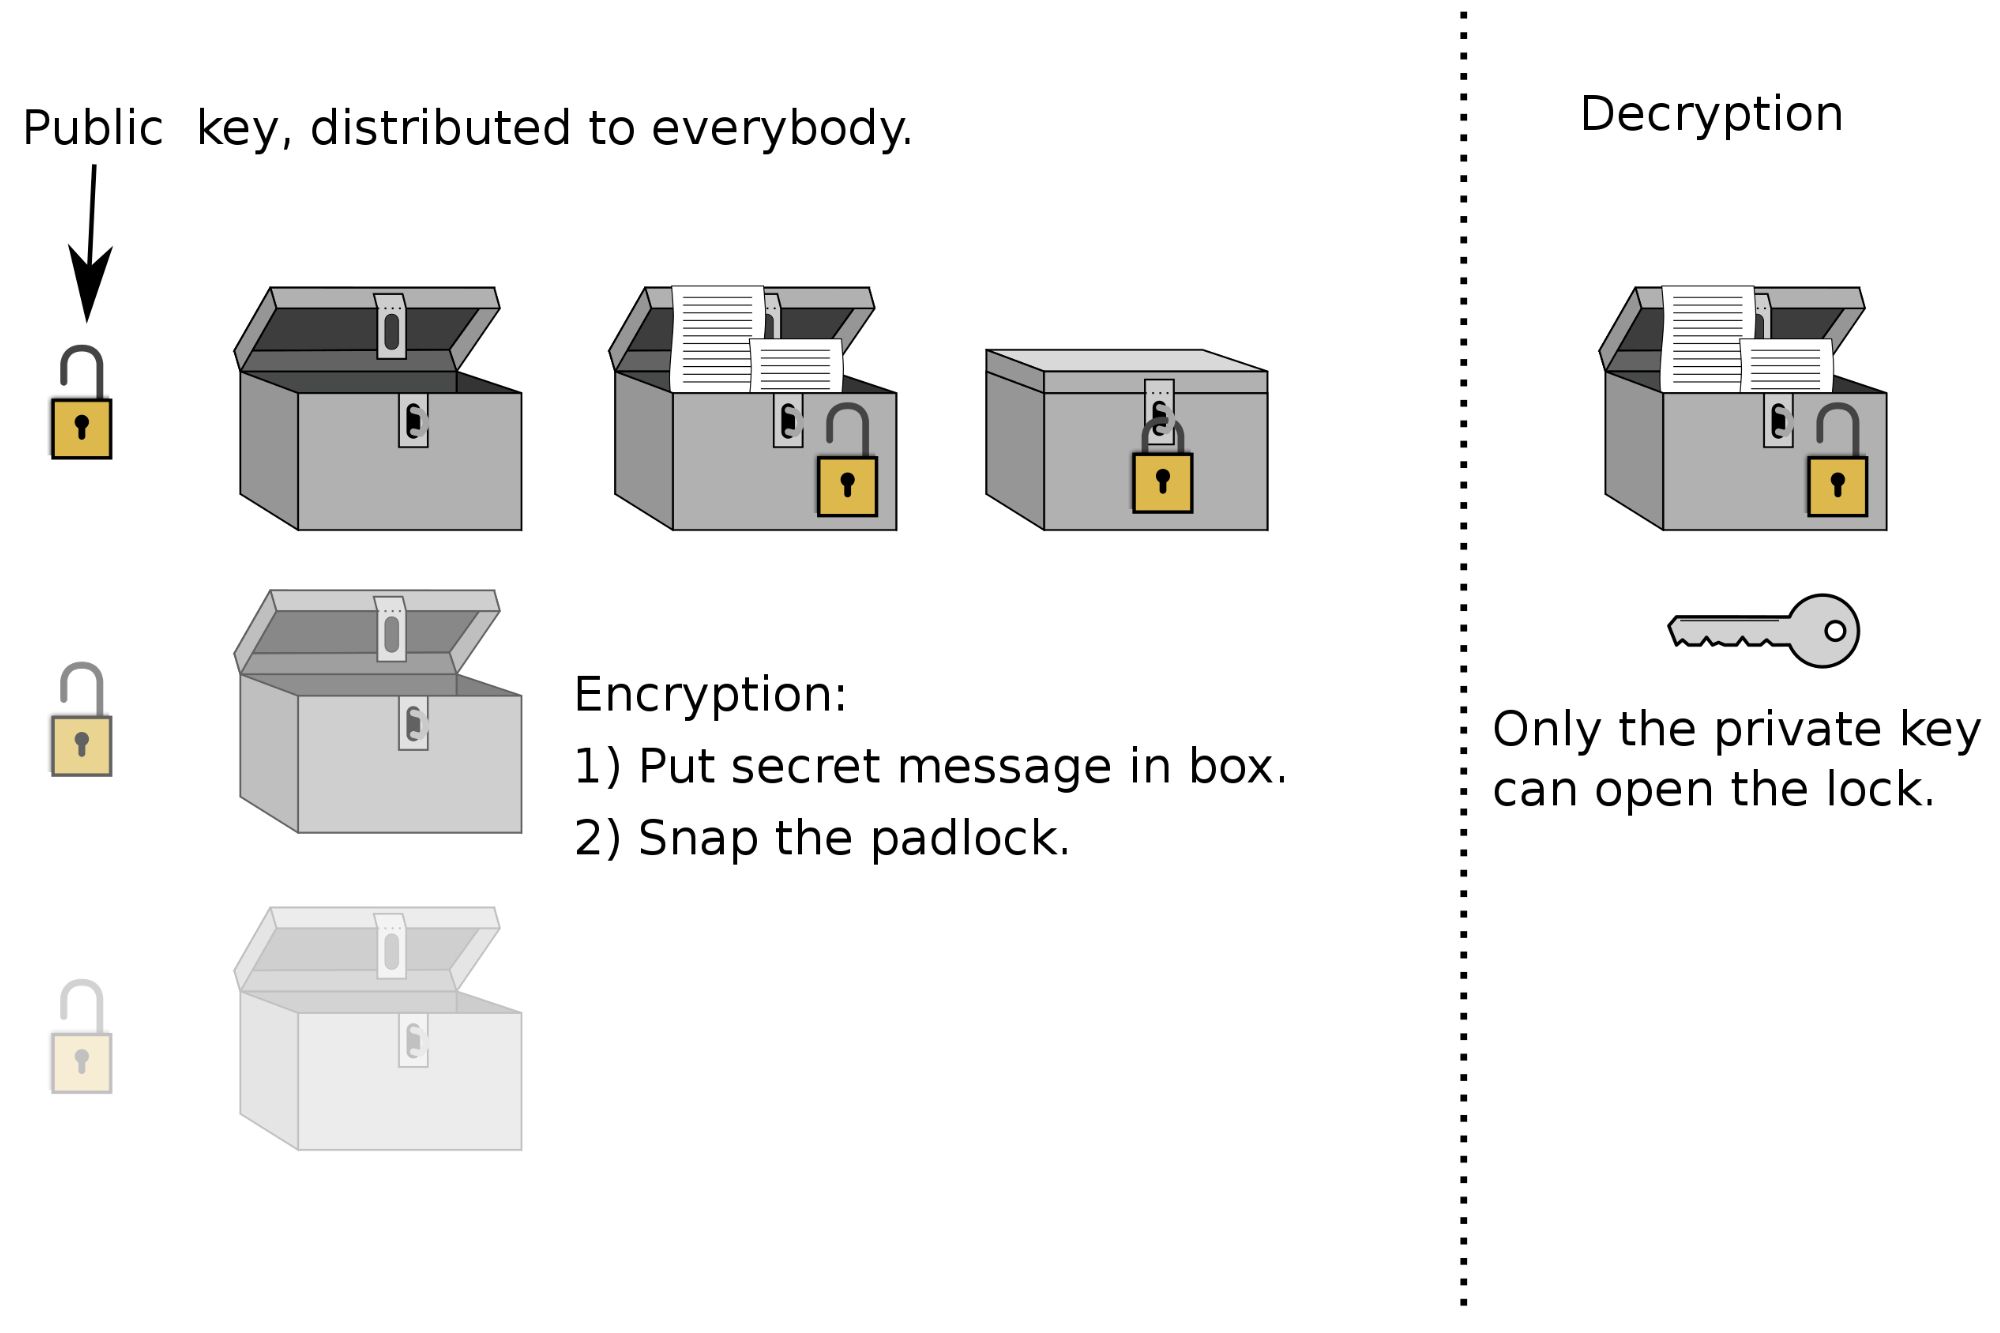 Asymmetric encryption illustration shown by snapping of padlocks